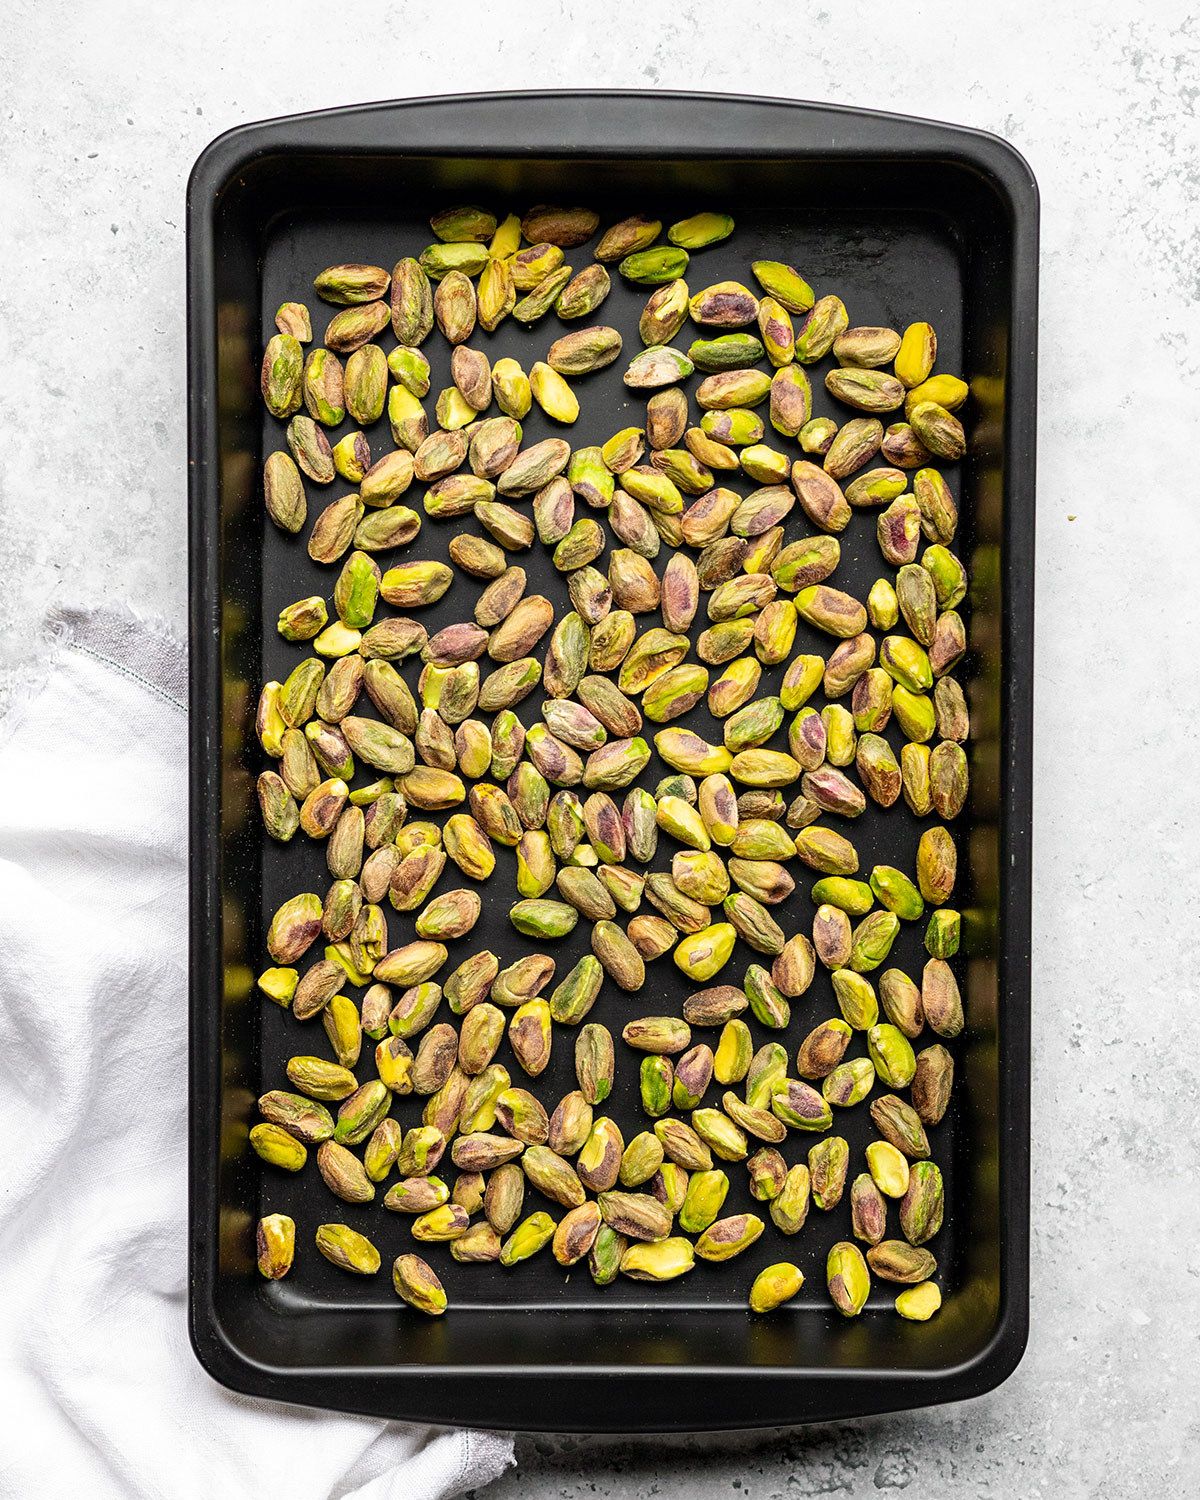 Green pistachio nuts on an oven tray.